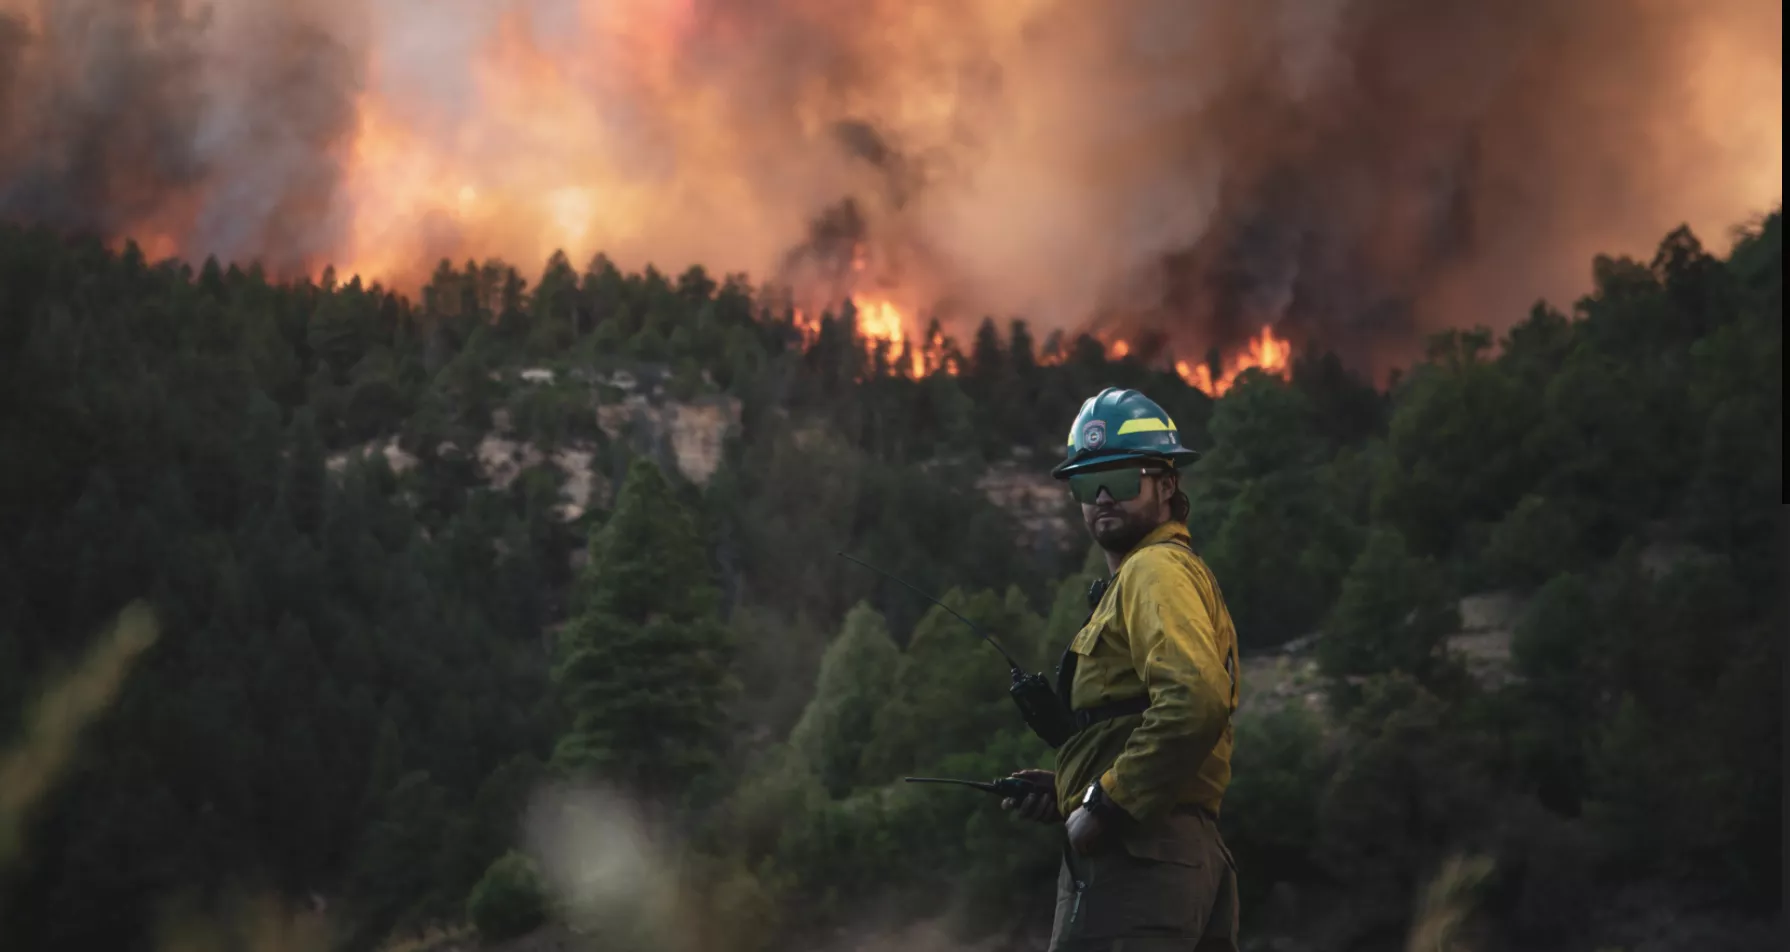 Firefighter standing in front of a forest fire